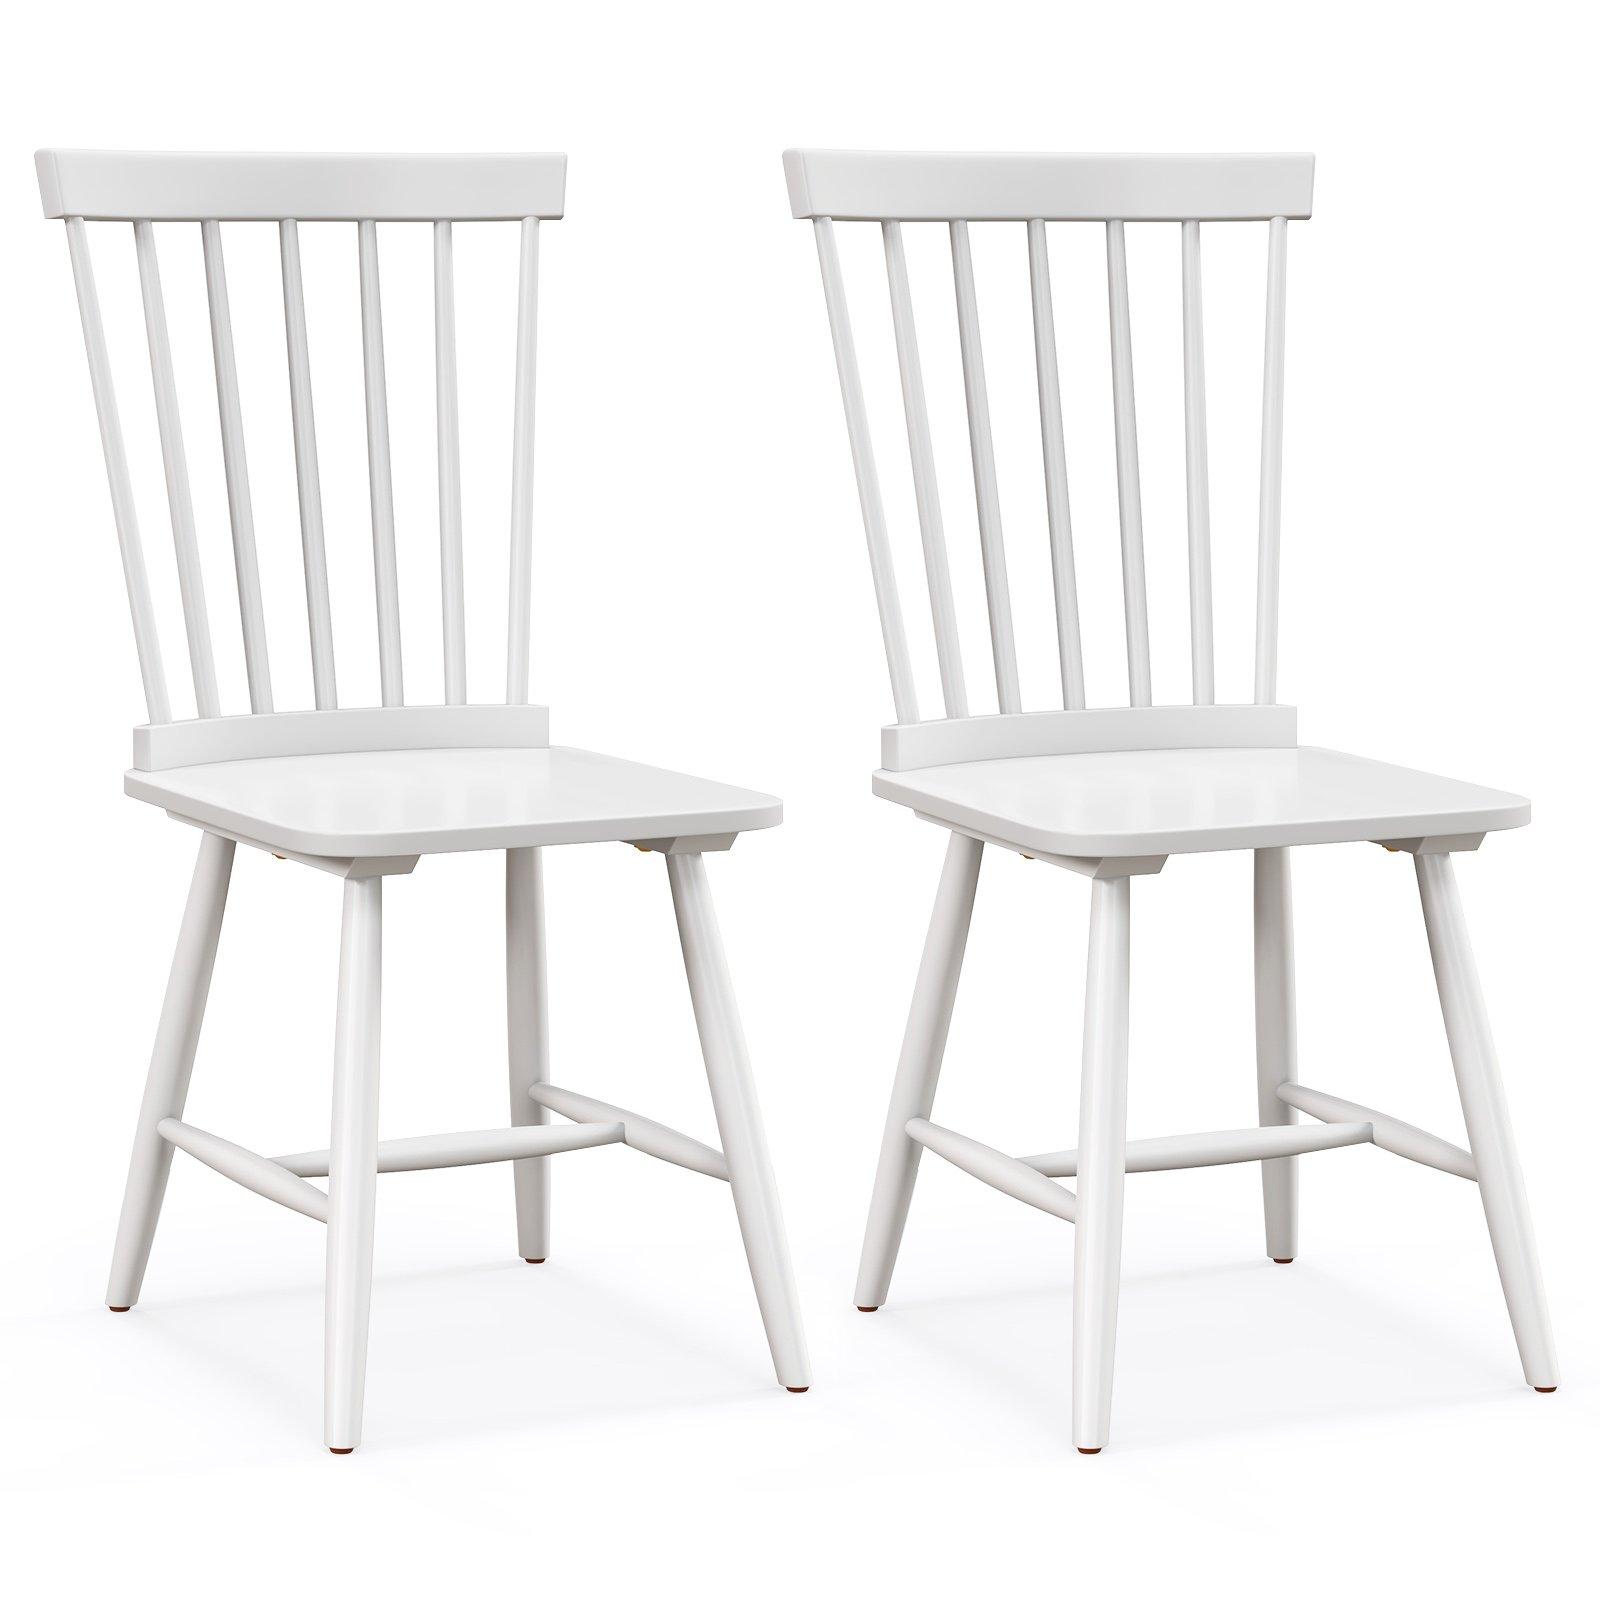 Set of 2 Wood Dining Chairs Windsor Style Armless Chairs Ergonomic Spindle Back